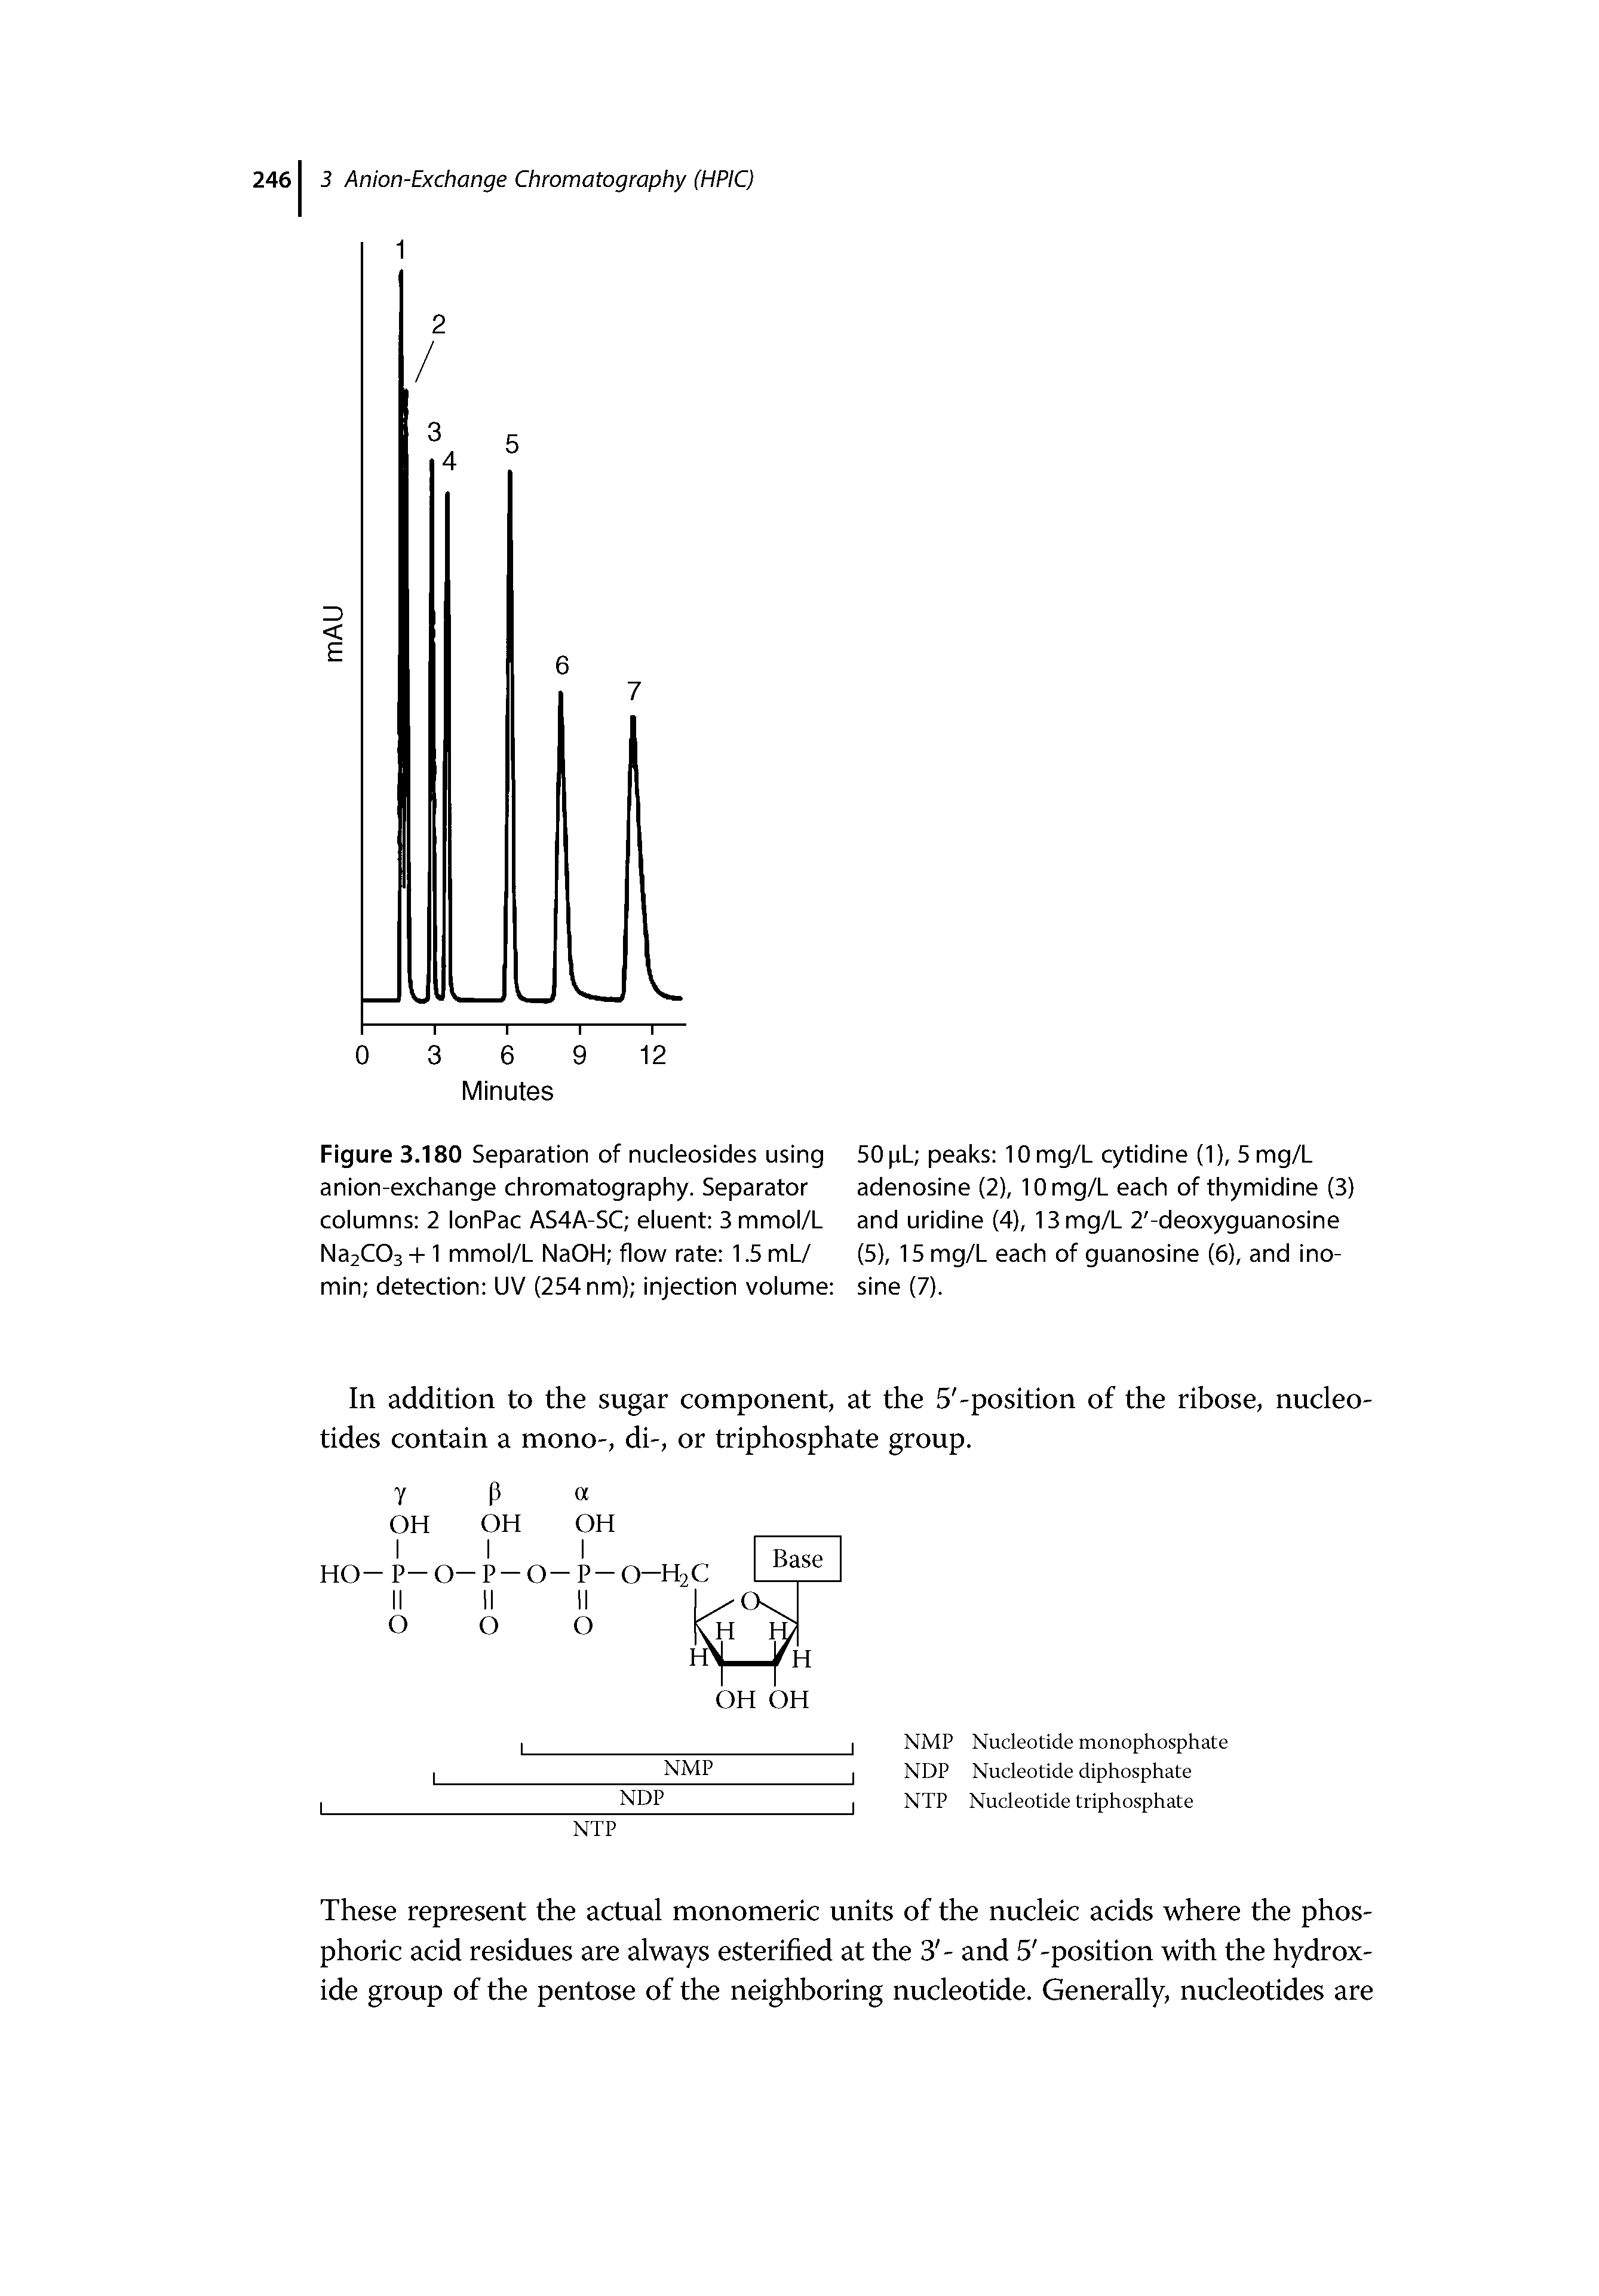 Figure 3.180 Separation of nucleosides using anion-exchange chromatography. Separator columns 2 lonPac AS4A-SC eluent 3 mmol/L Na2C03 -h 1 mmol/L NaOH flow rate 1.5 mL/...